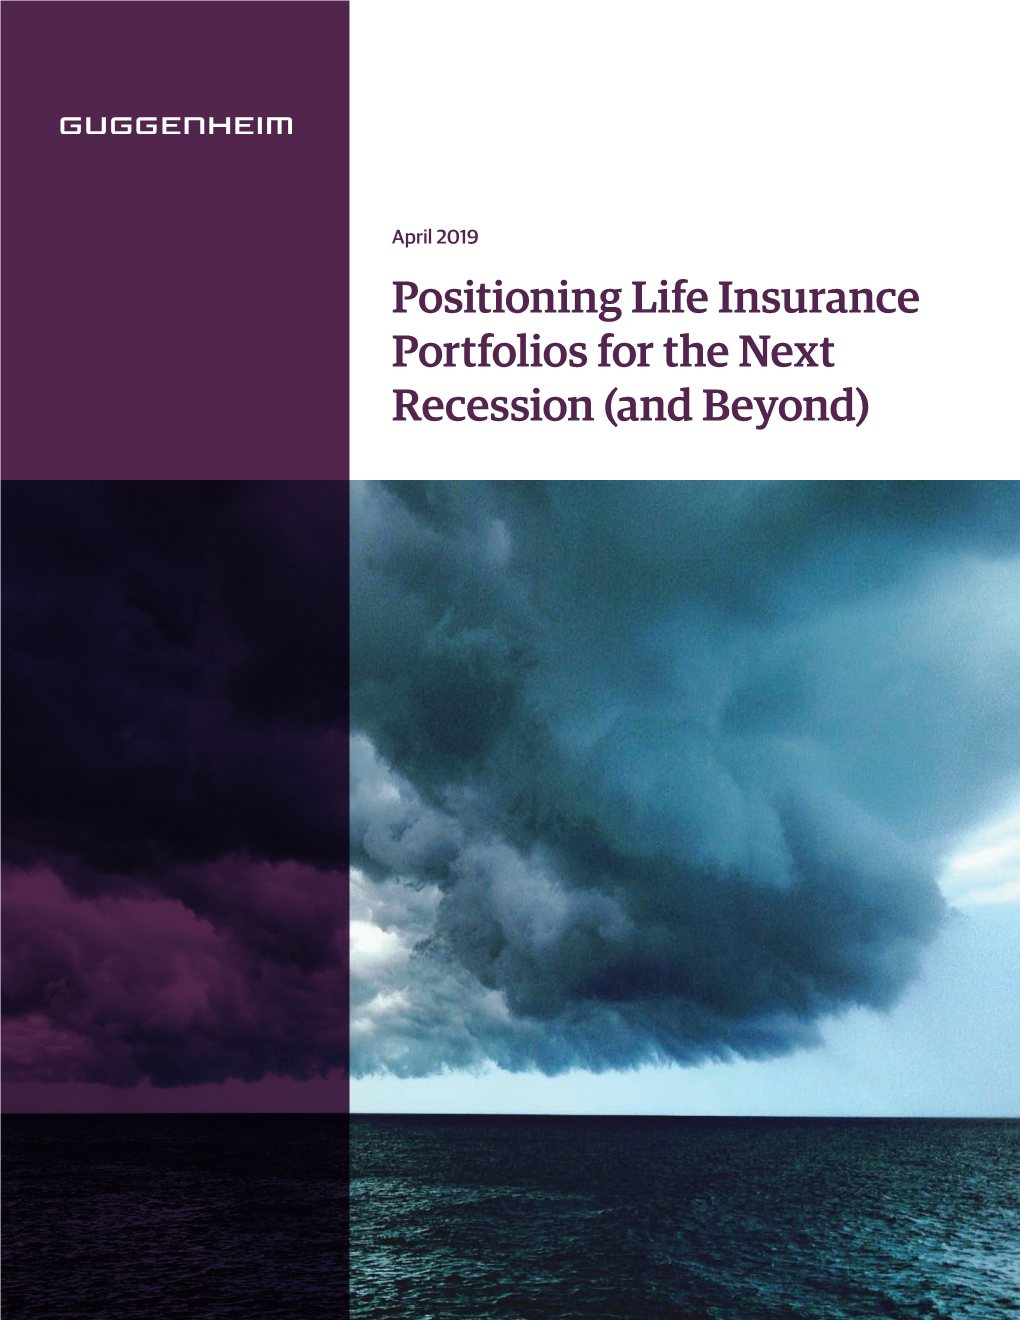 Positioning Life Insurance Portfolios for the Next Recession (And Beyond) from the Desk of the Global CIO